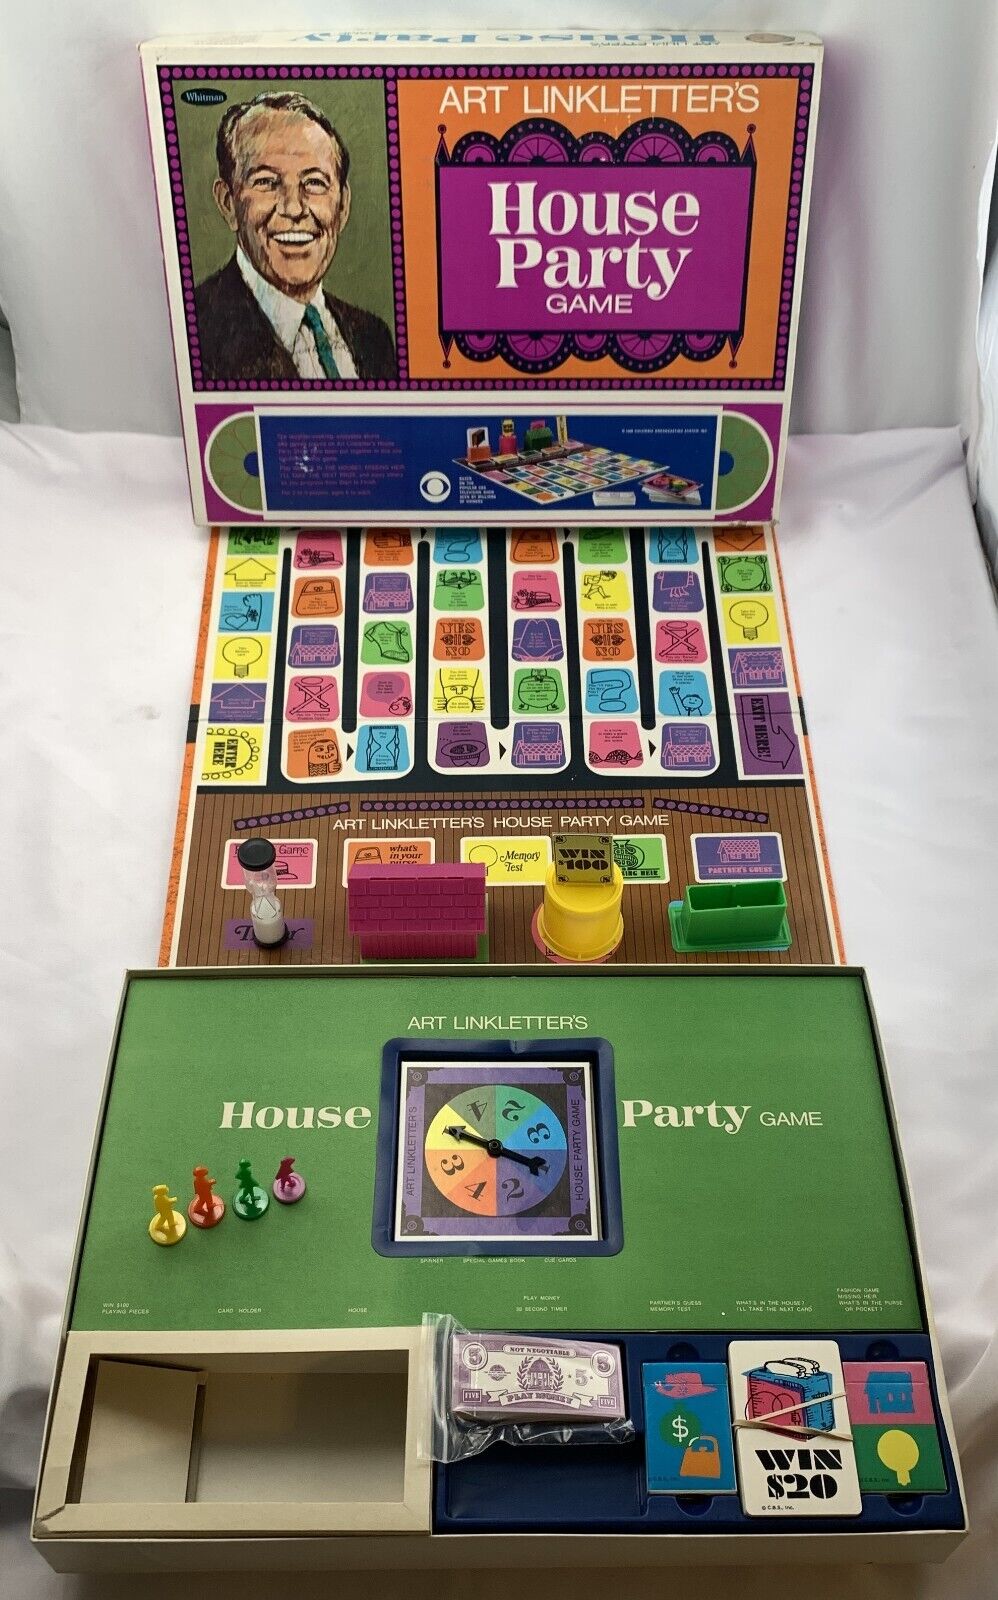 1968 Art Linkletter\'s House Party Game by Whitman Complete in Good Condition